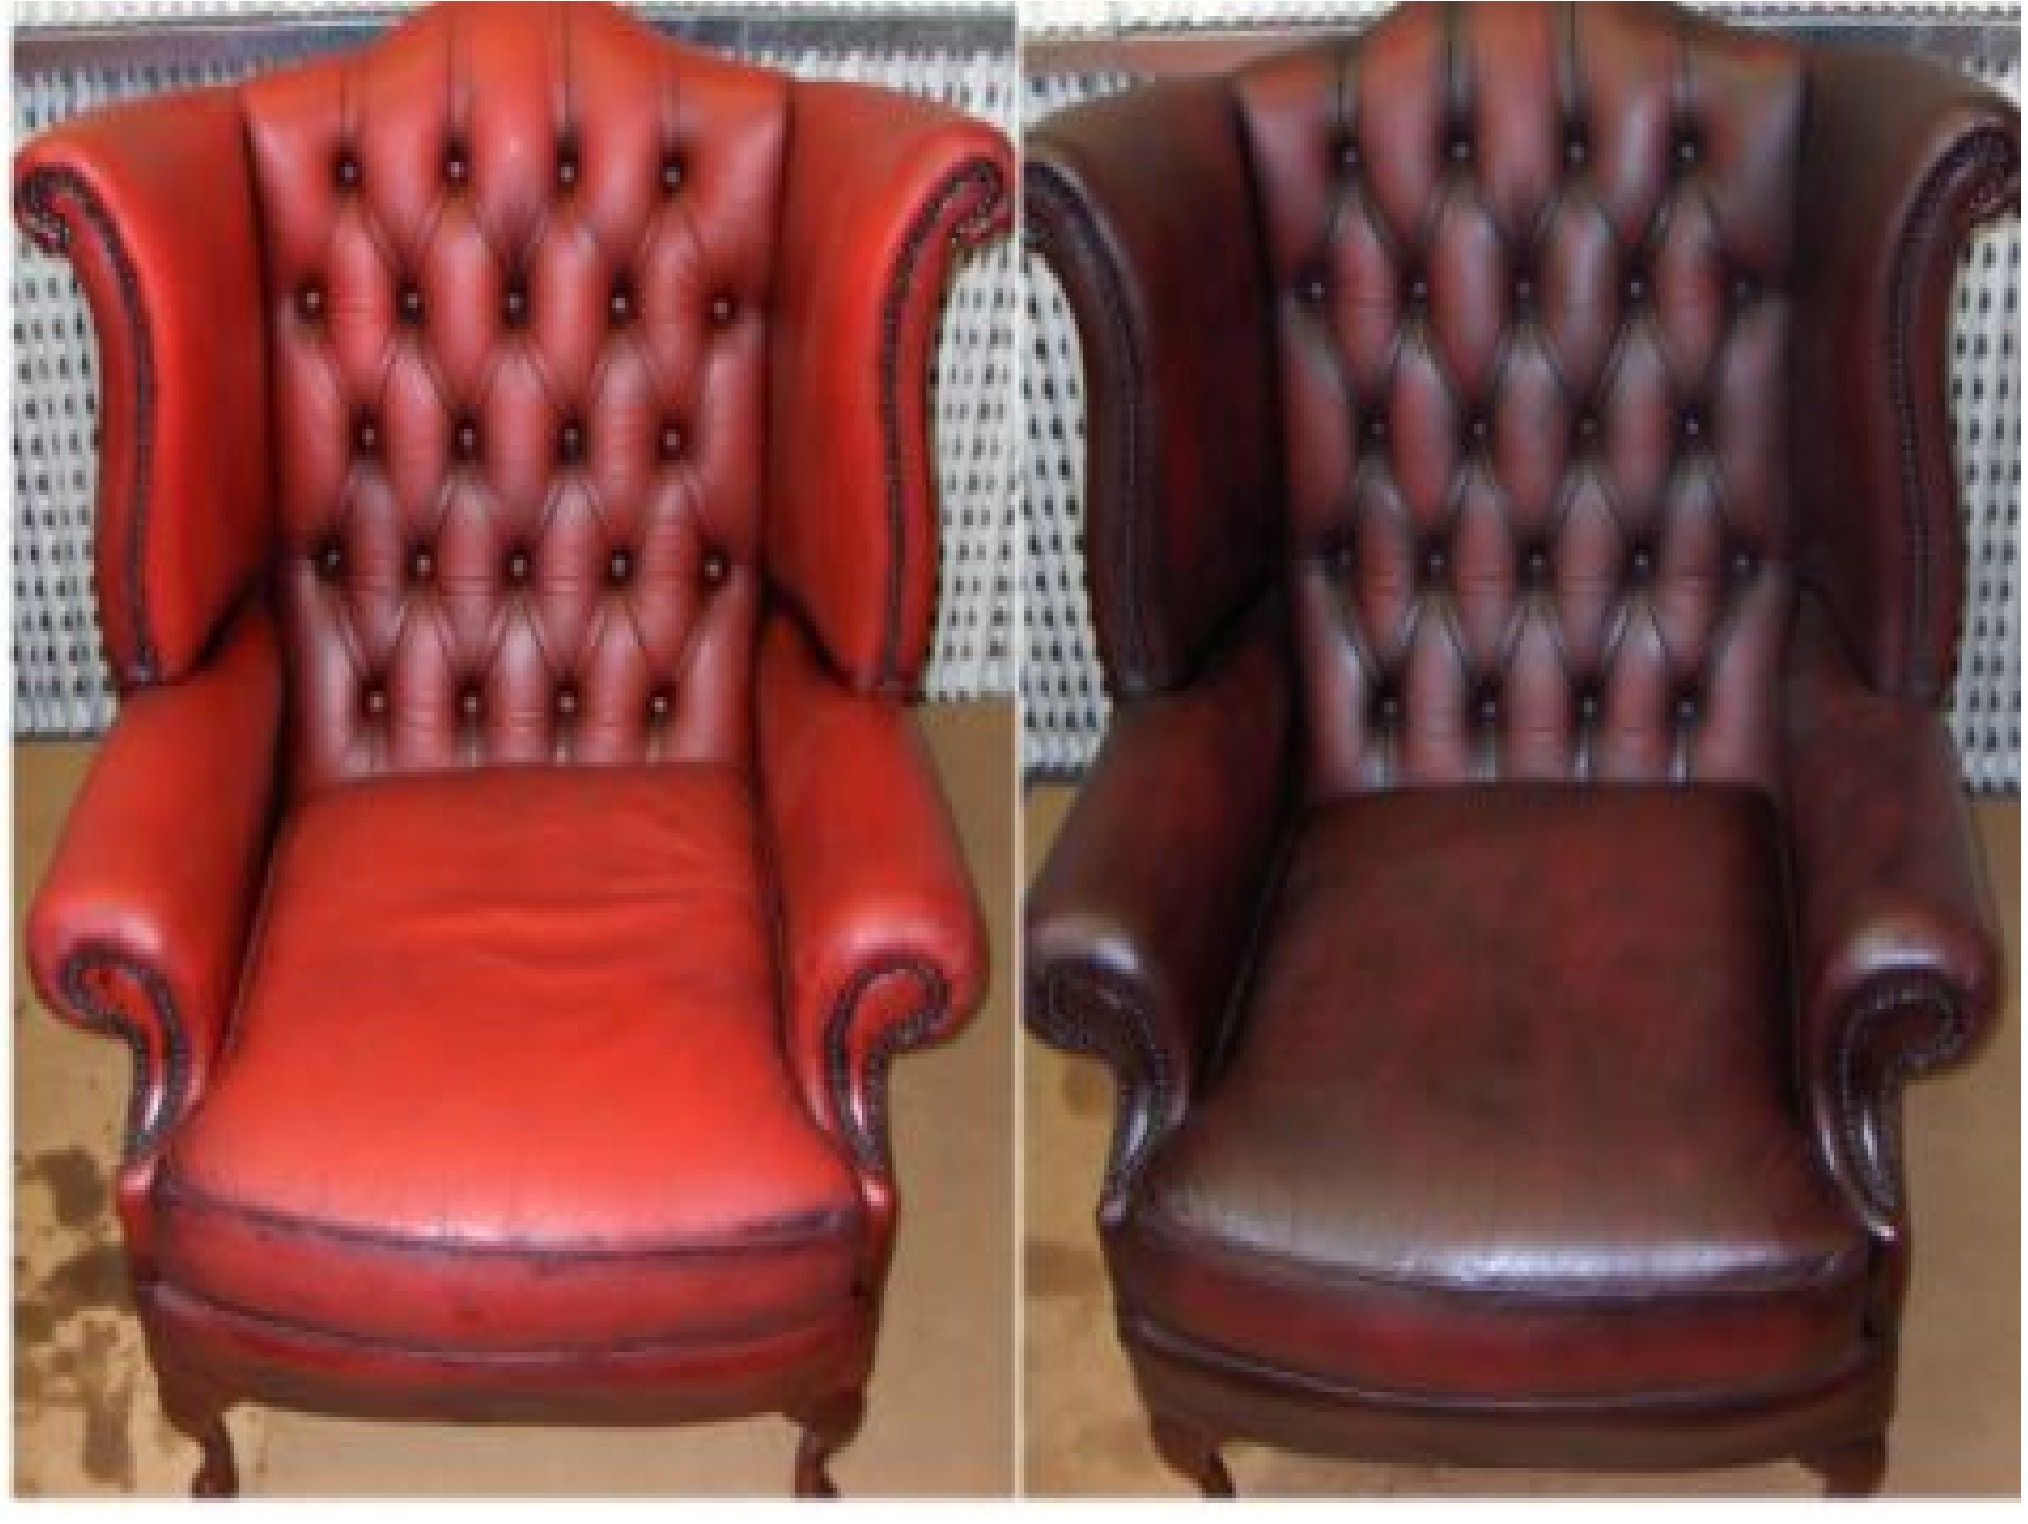 Furniture Clinic LEATHER COLOR in 24 Different Standard Colors to Dye All  Types of Leather Such as Leather Furniture, Handbags, Shoes Etc -  Hong  Kong